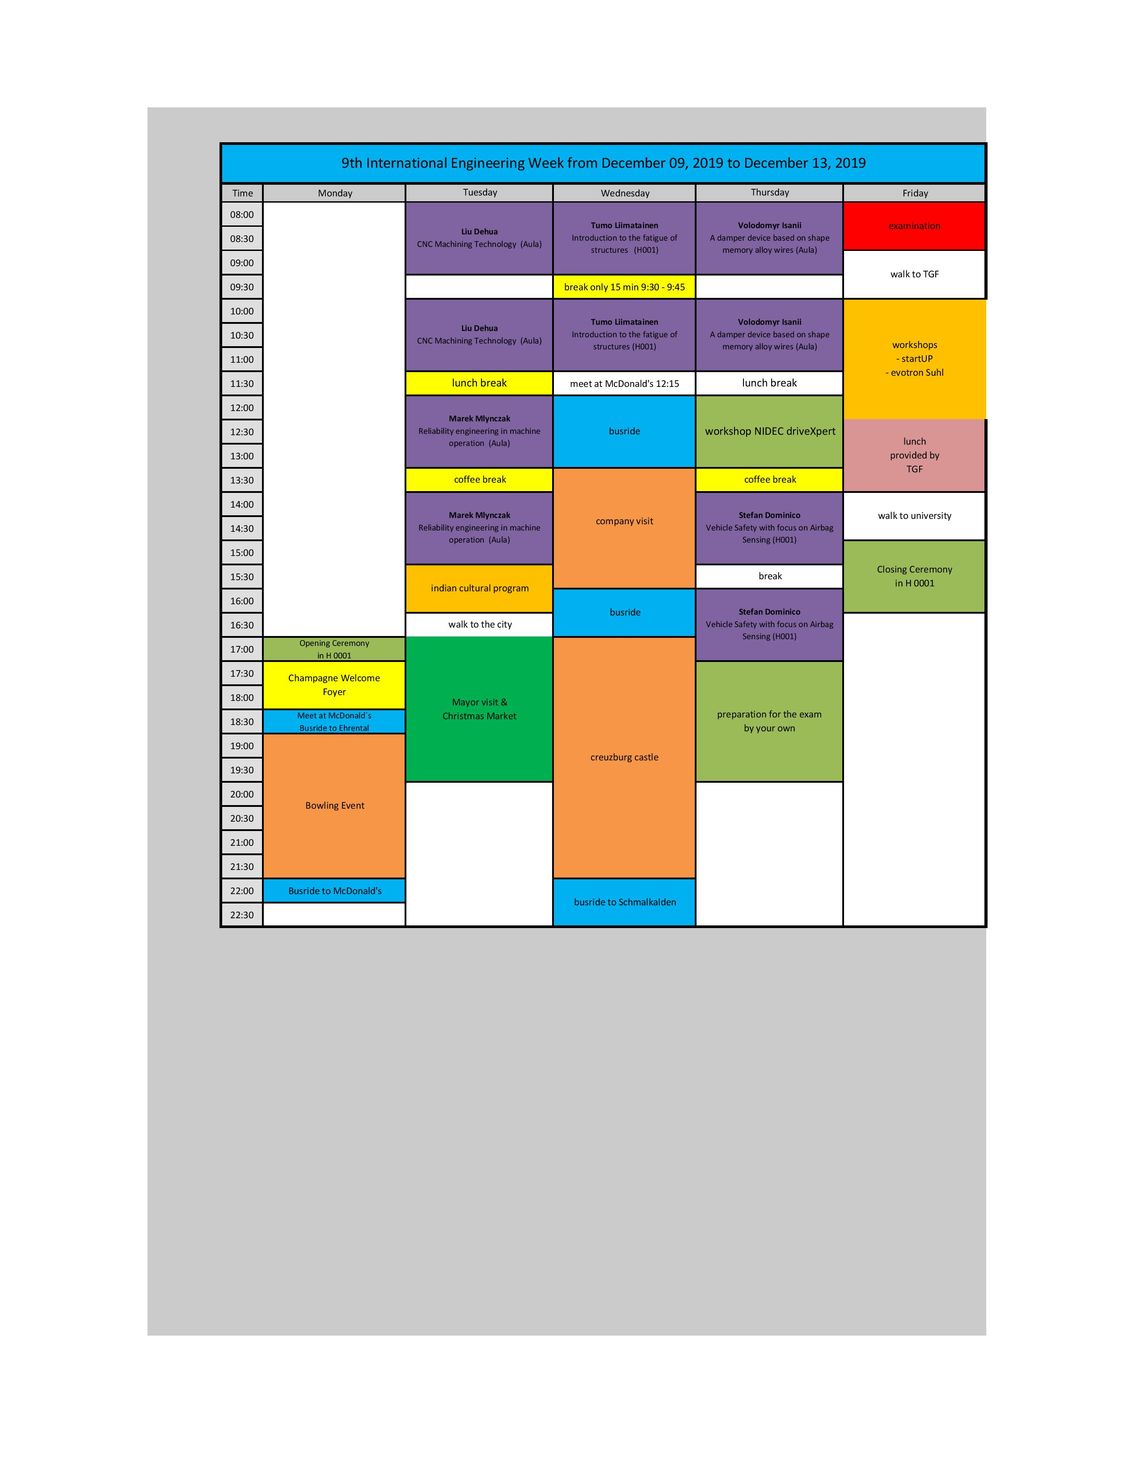 Schedule IEW 2019 Group Red, Blue and Green